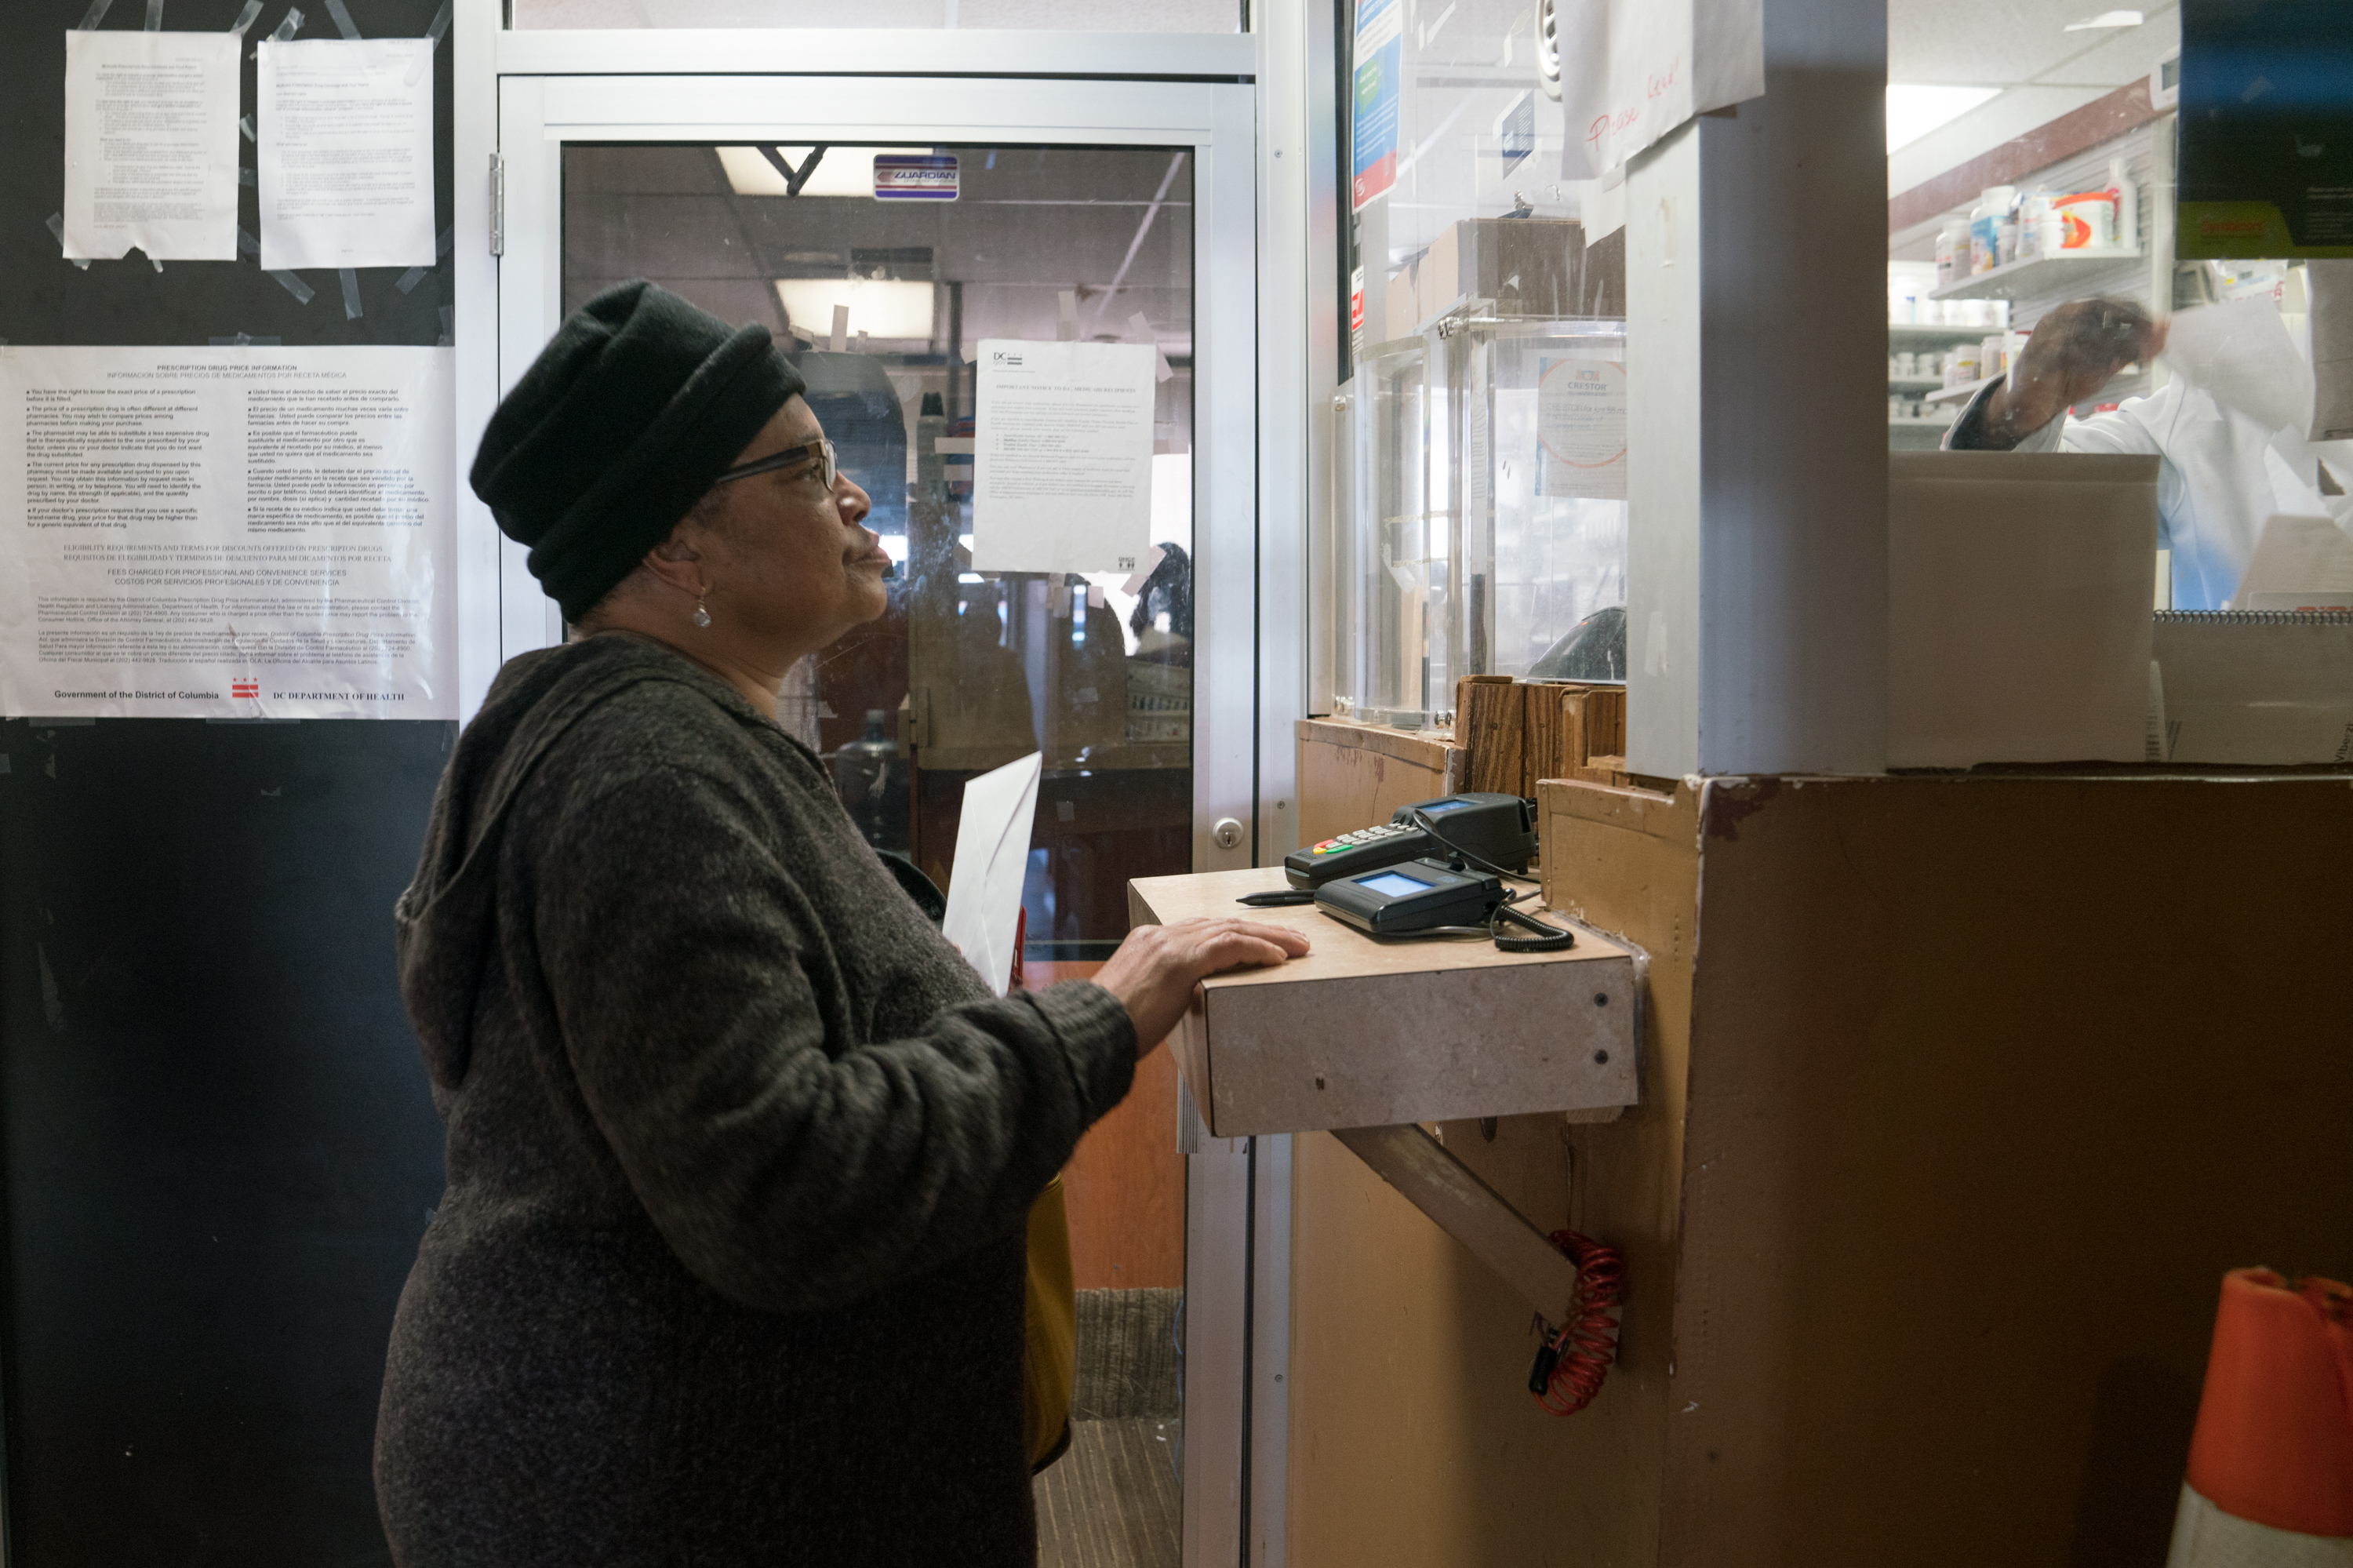 Pauletta Jackson drops off her prescription for Suboxone at the pharmacy just downstairs from Chapman's clinic. (Photo by Claire Harbage/NPR)